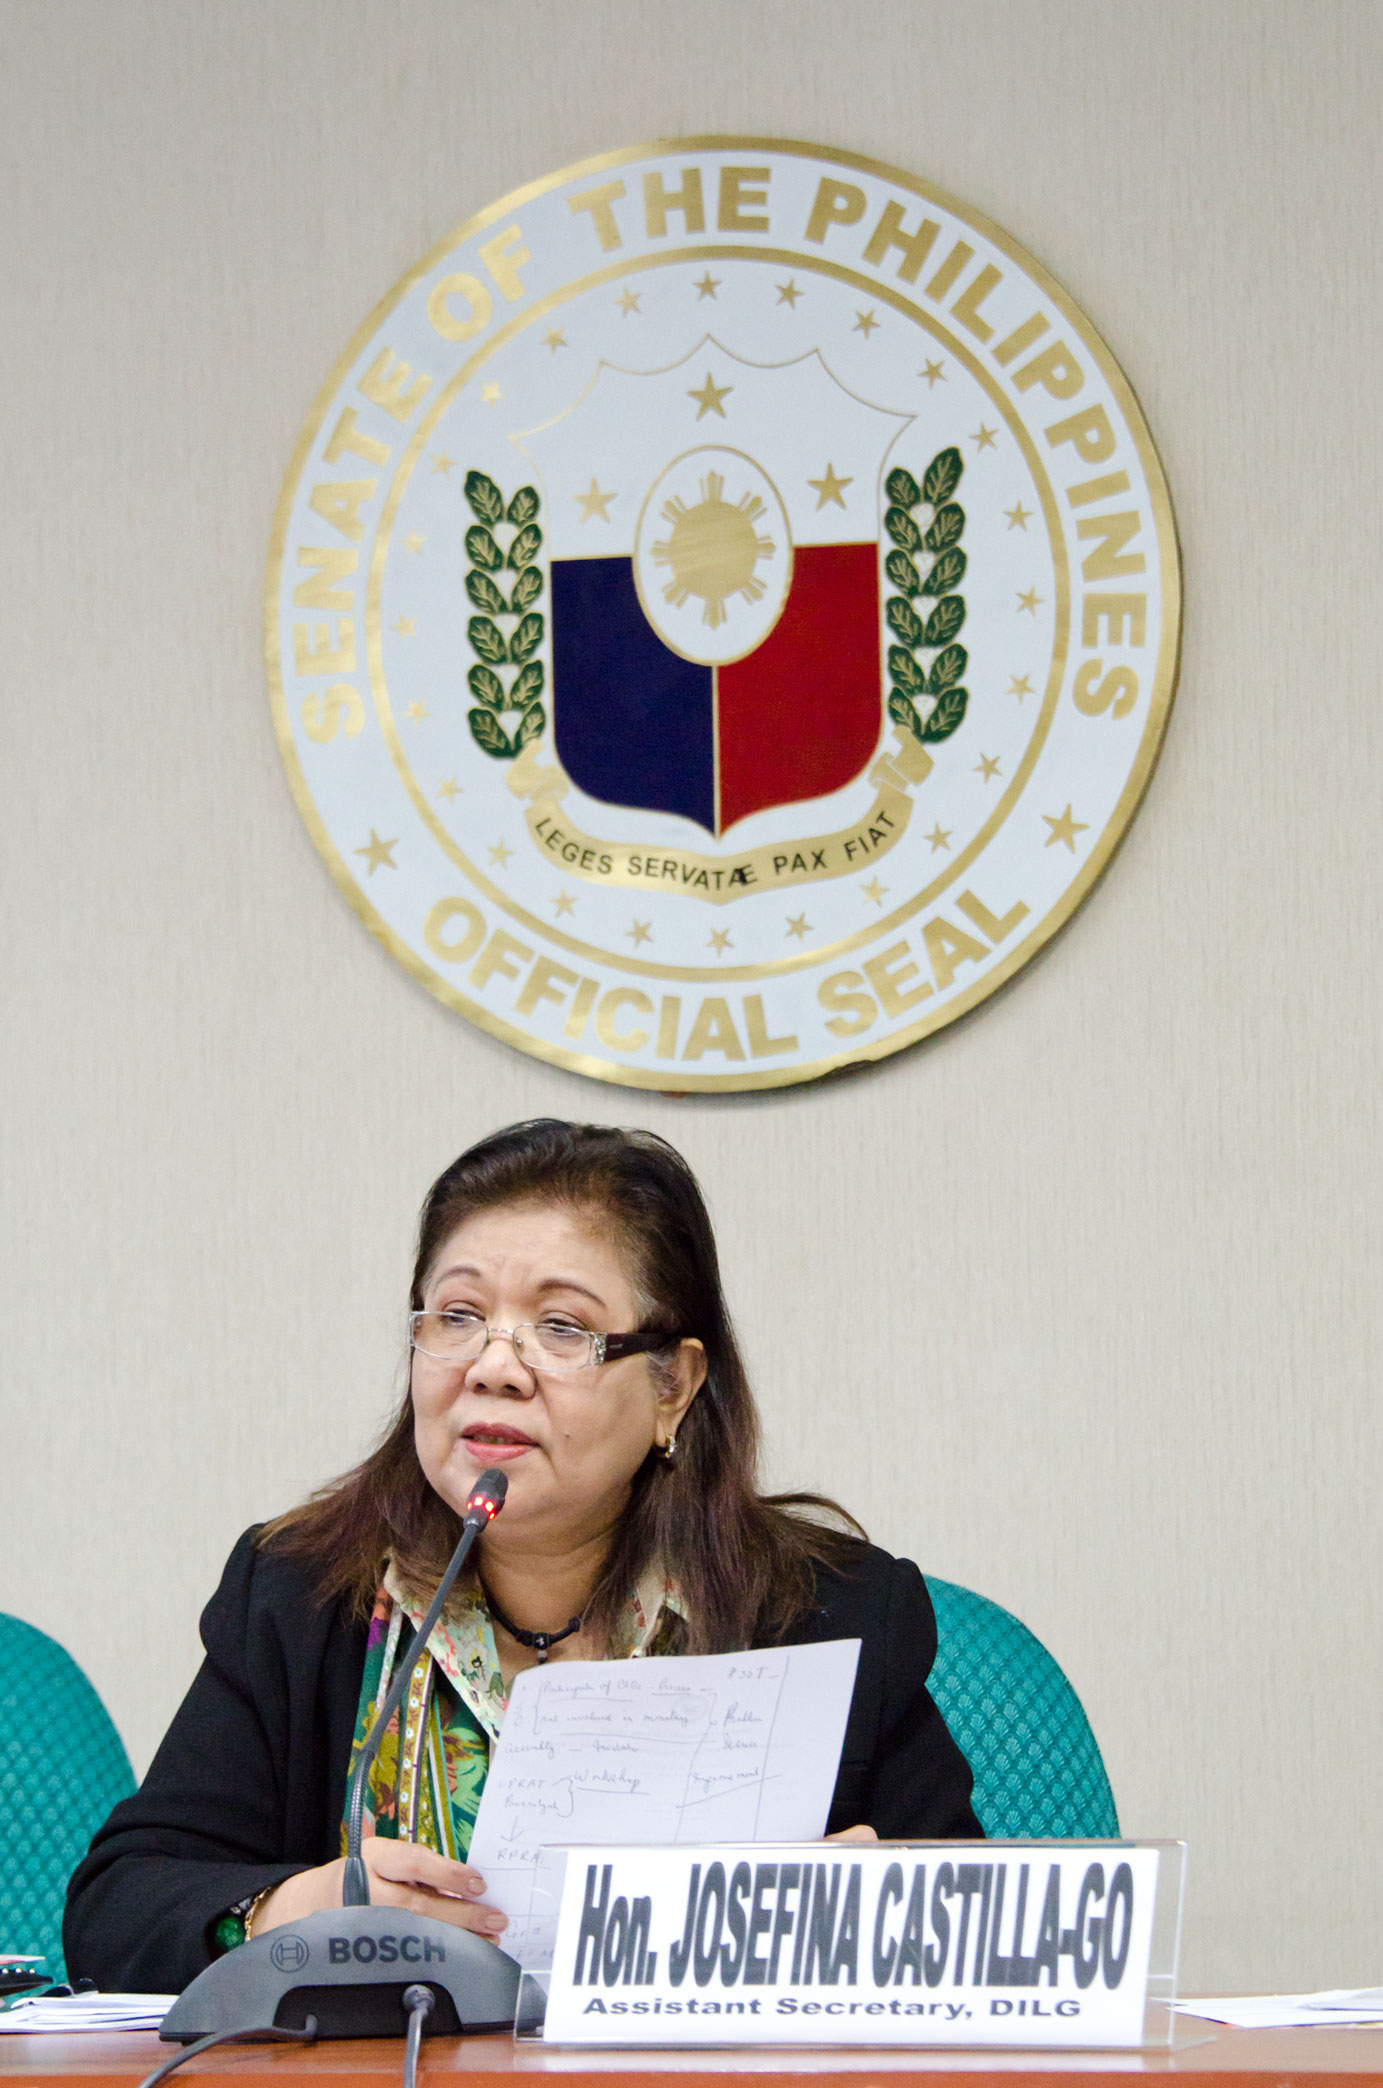 Senate Centennial Lecture Series “Assessment of the Bottom-up Budgeting Process for FY 2015-ggm_8018.jpg